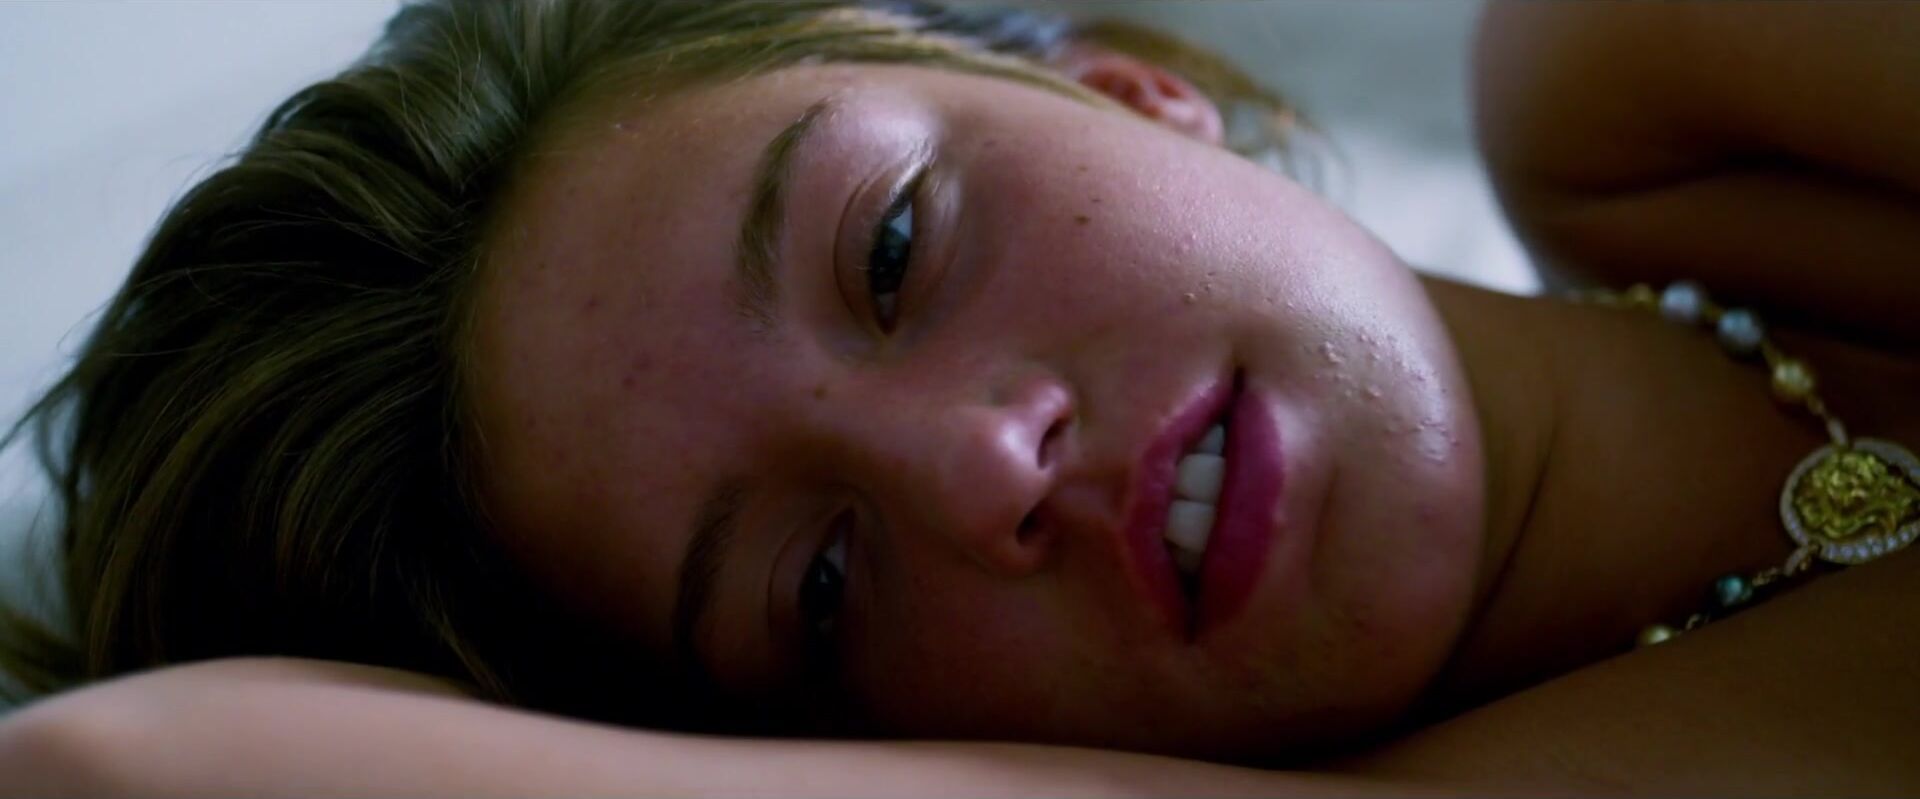 Nasty Adele Exarchopoulos and other French girls naked fool around in Orpheline (2016) Beeg - 2